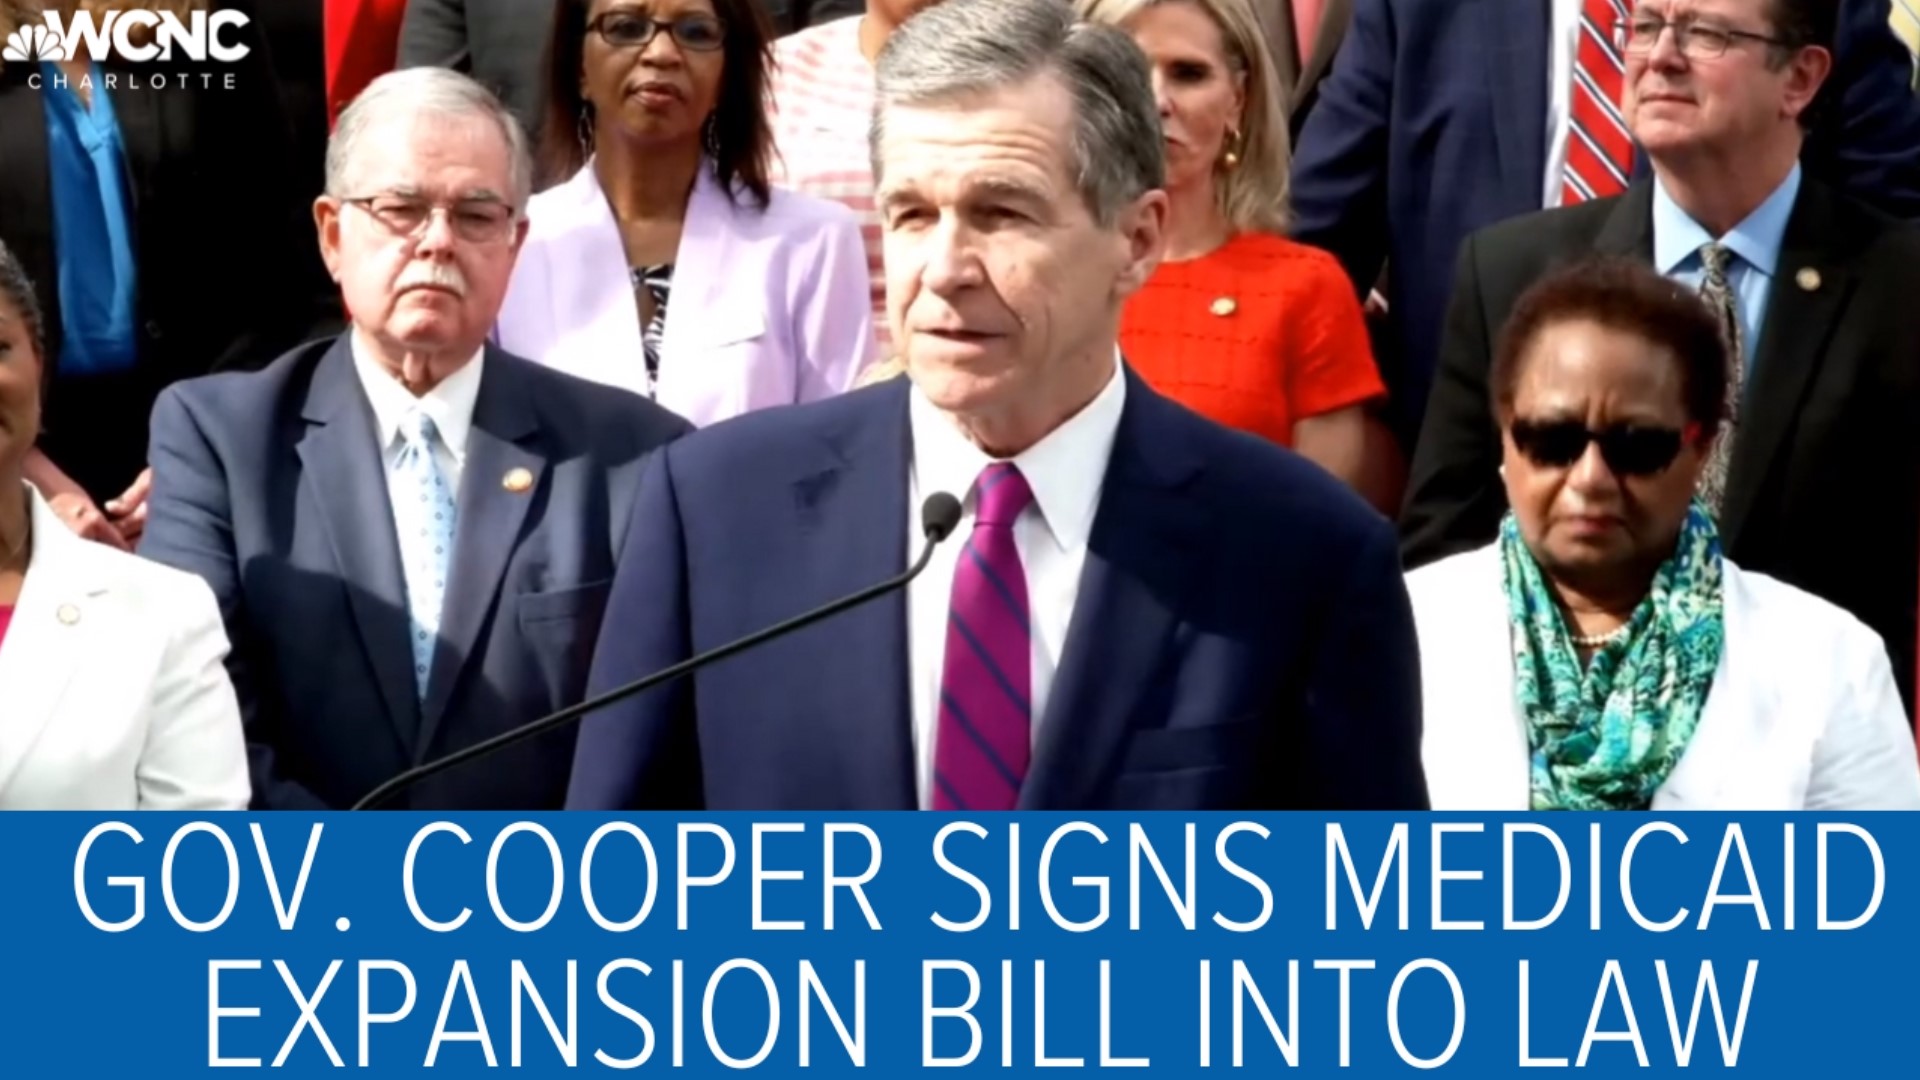 A Medicaid expansion deal in North Carolina is now official after Democratic Gov. Roy Cooper signed it into law Monday.